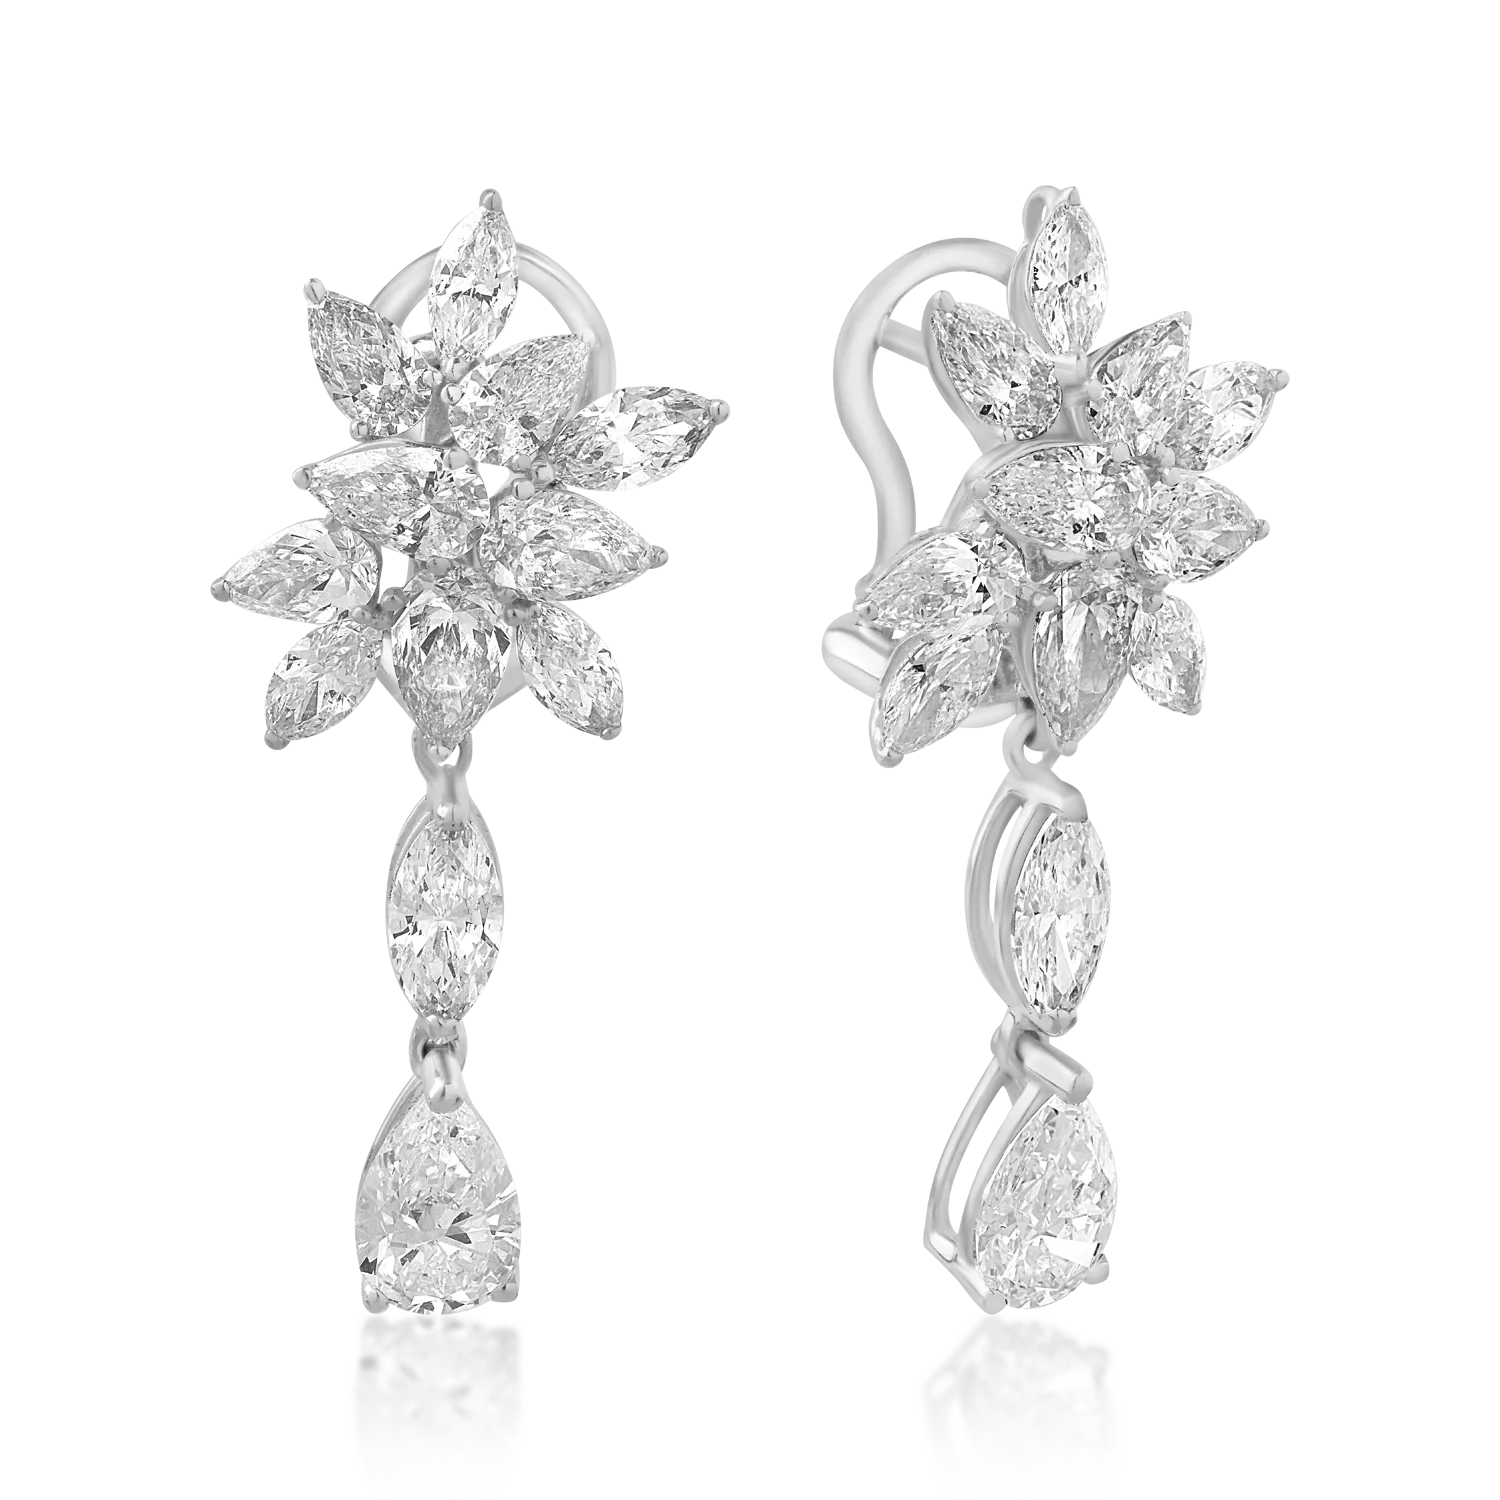 18K white gold earrings with 4.08ct diamonds